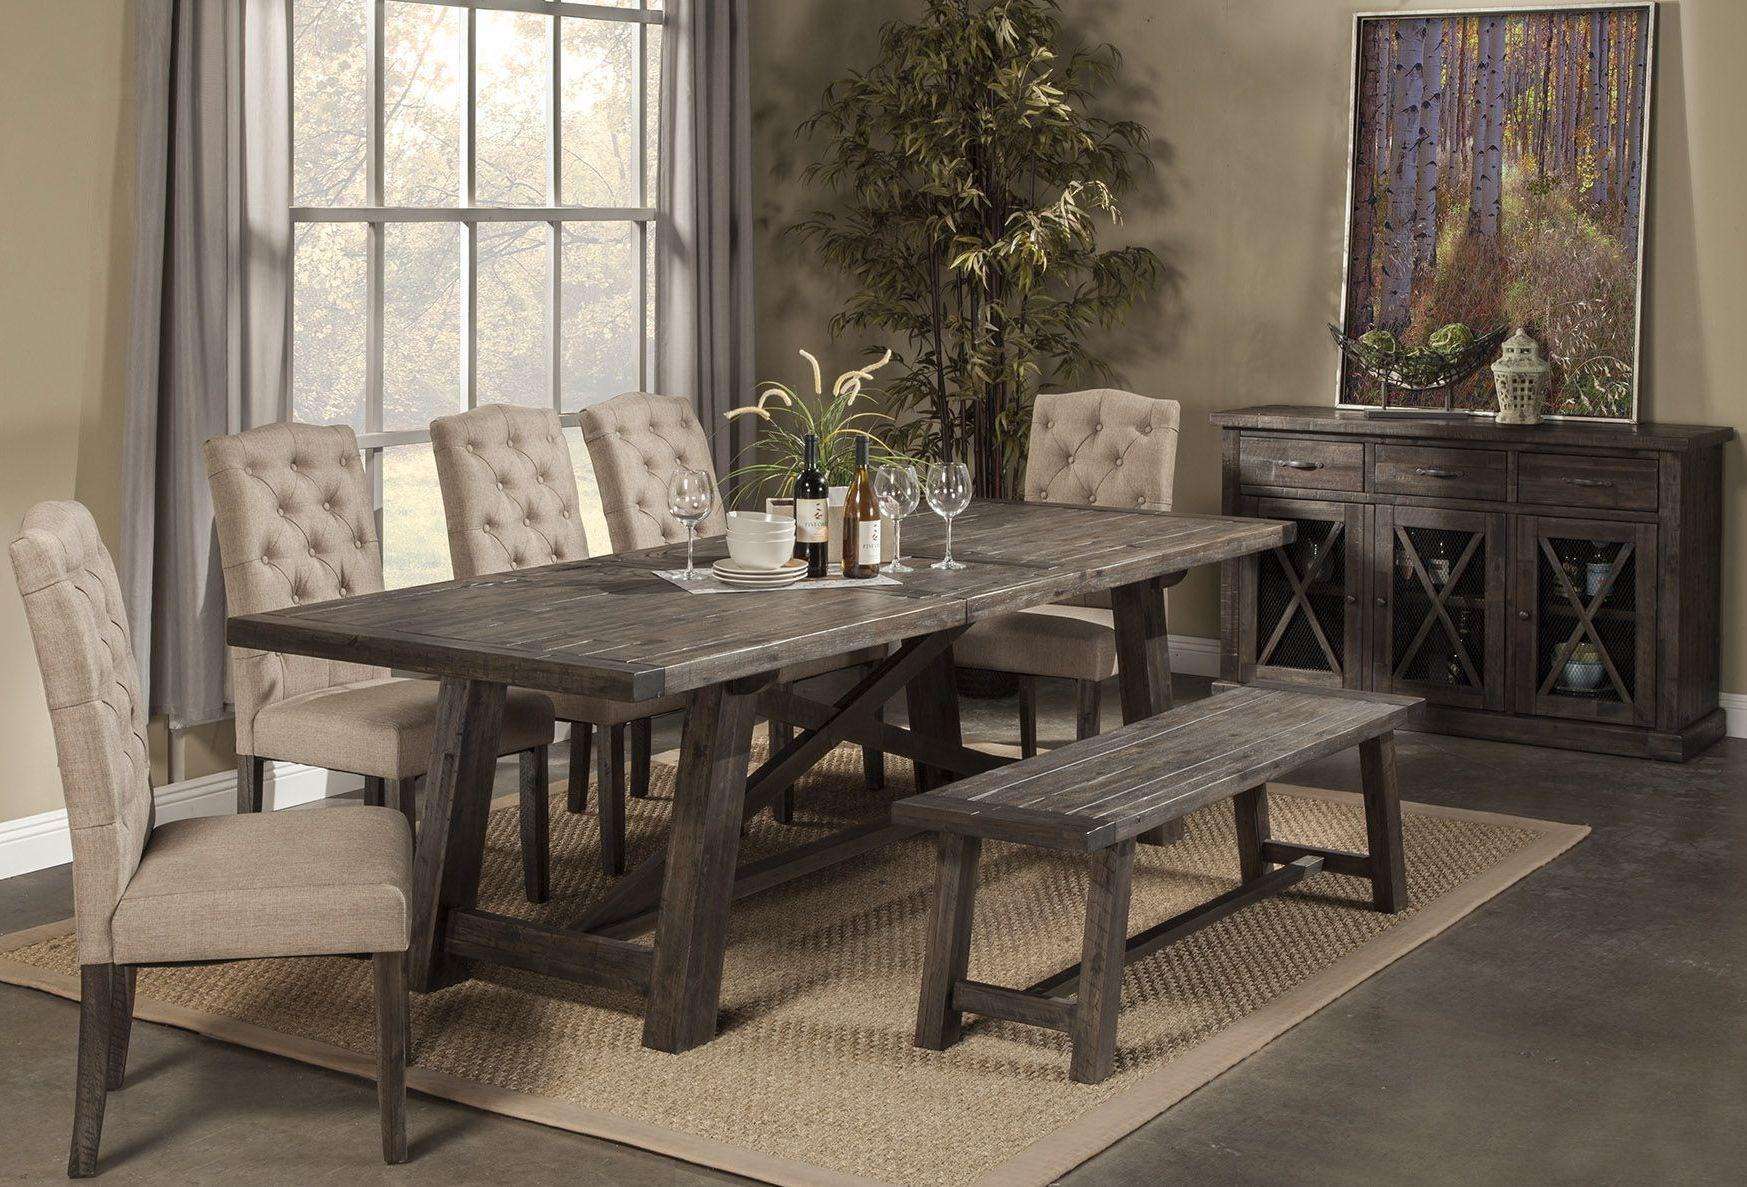 Traditional Dining Table Set NEWBERRY 1468-22-Set-7 in Cream, Gray Fabric